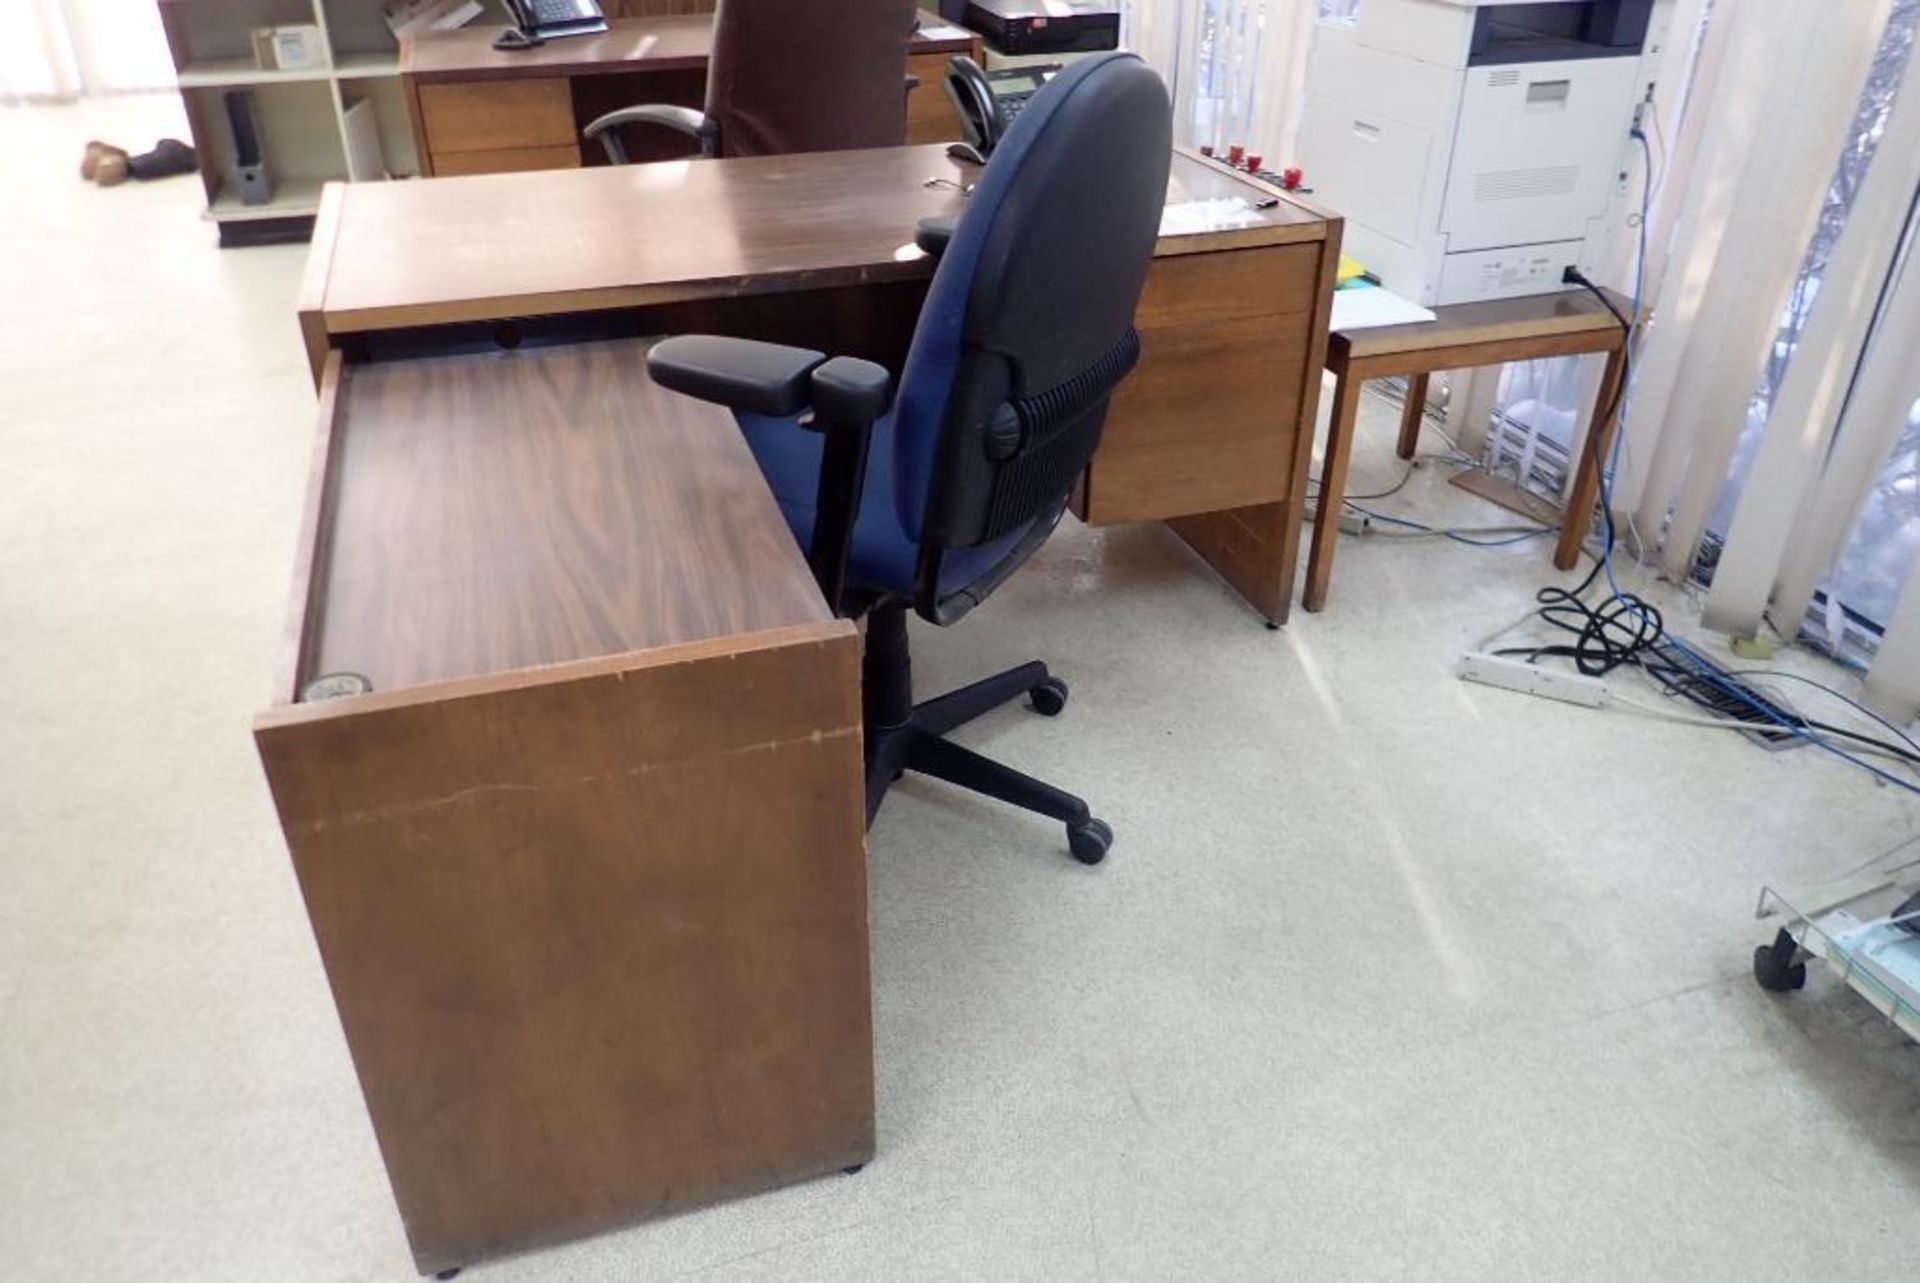 Lot of (3) Desks, L-Shaped Desk, (3) Chairs and (4) Filing Cabinets. - Image 3 of 4